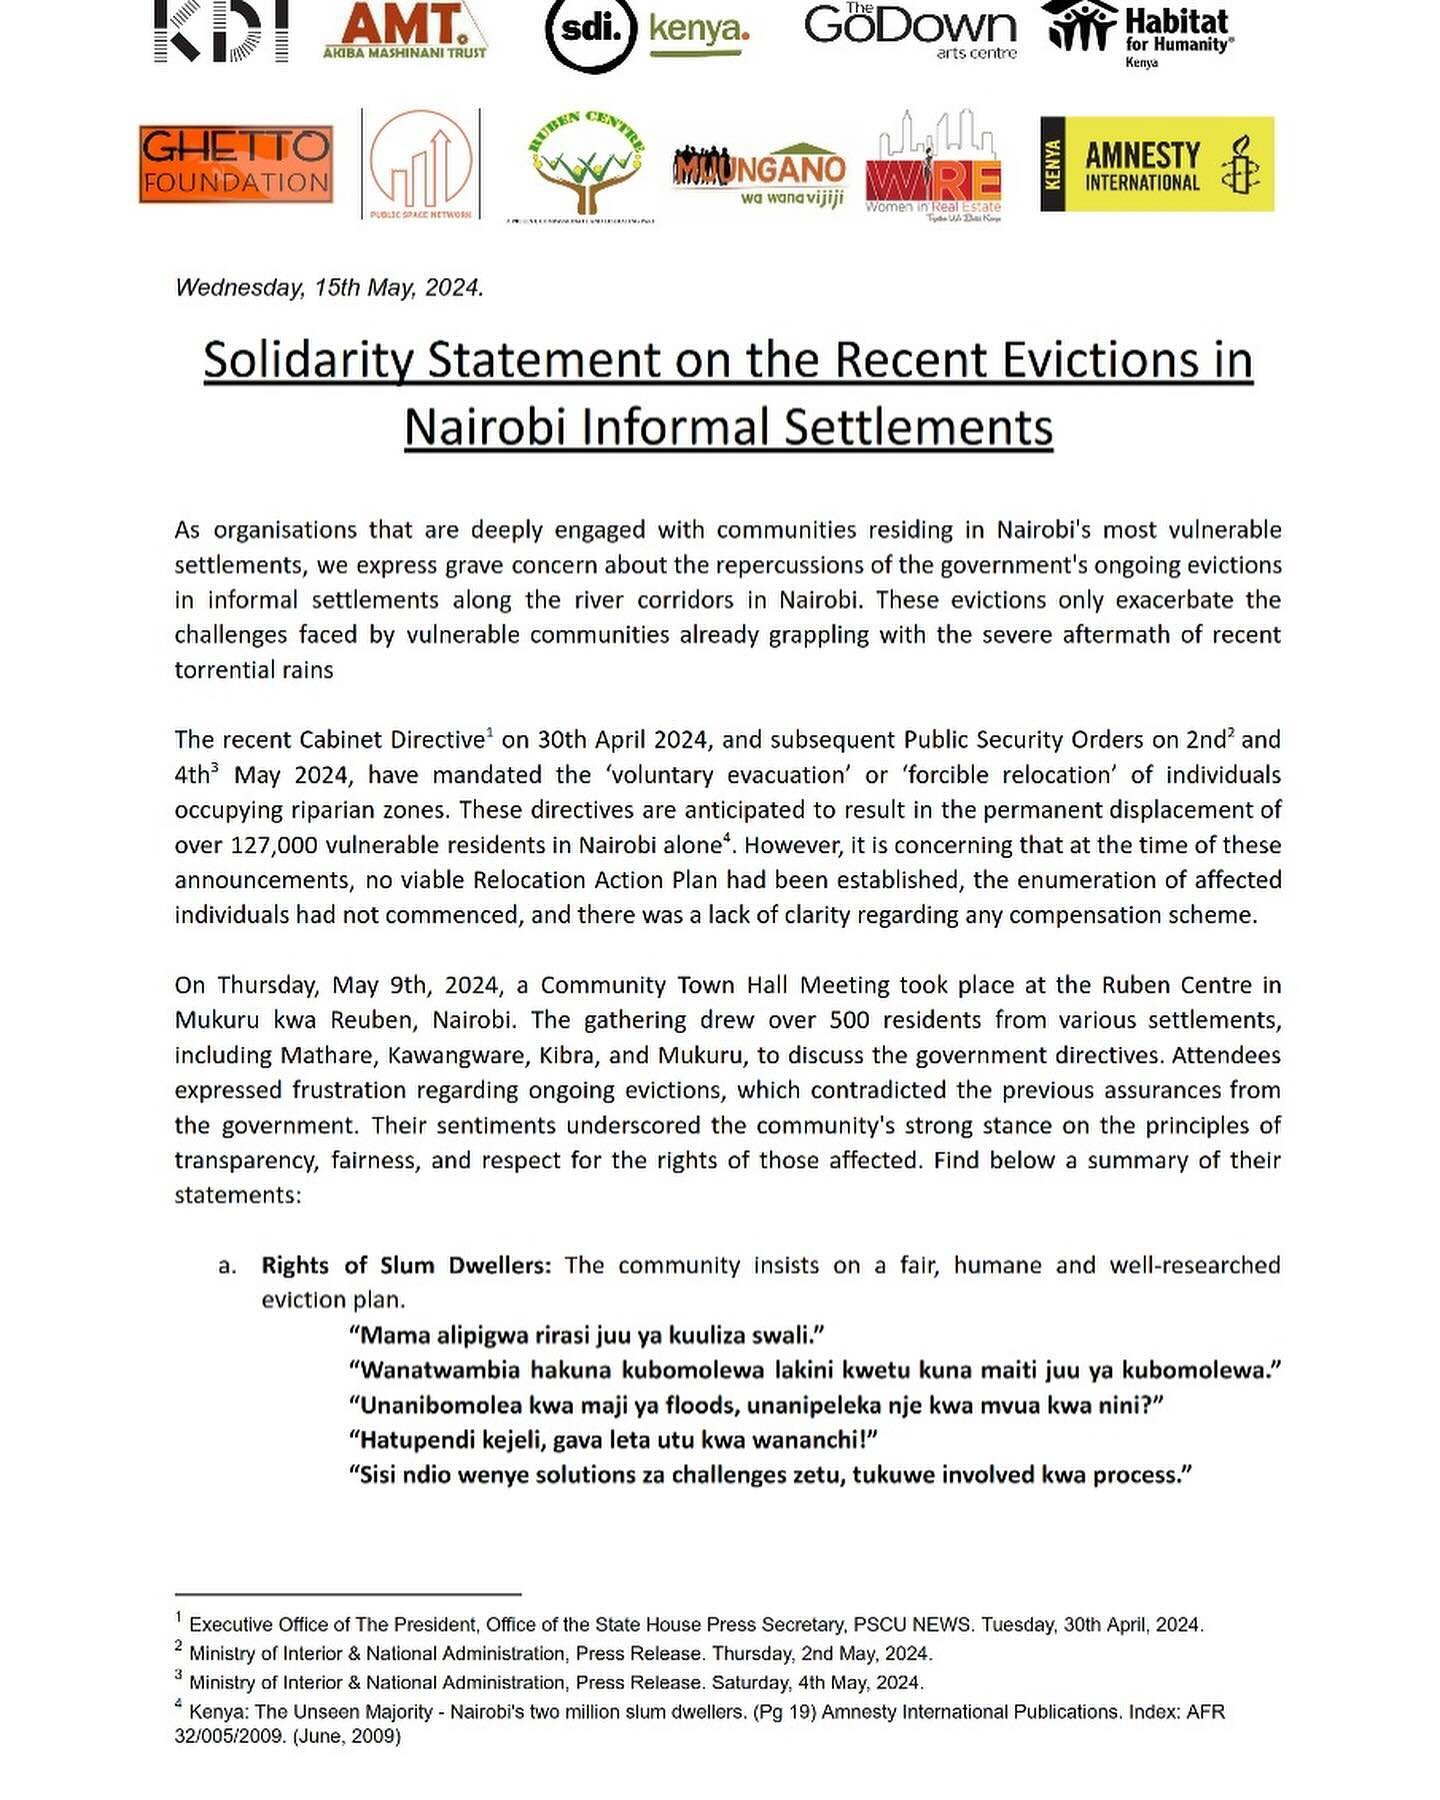 As organizations deeply embedded in informal settlements, we voice our concerns over the Government&rsquo;s corridor evictions. Read our statement for insight into the challenges faced by affected residents and our recommendations for equitable solut